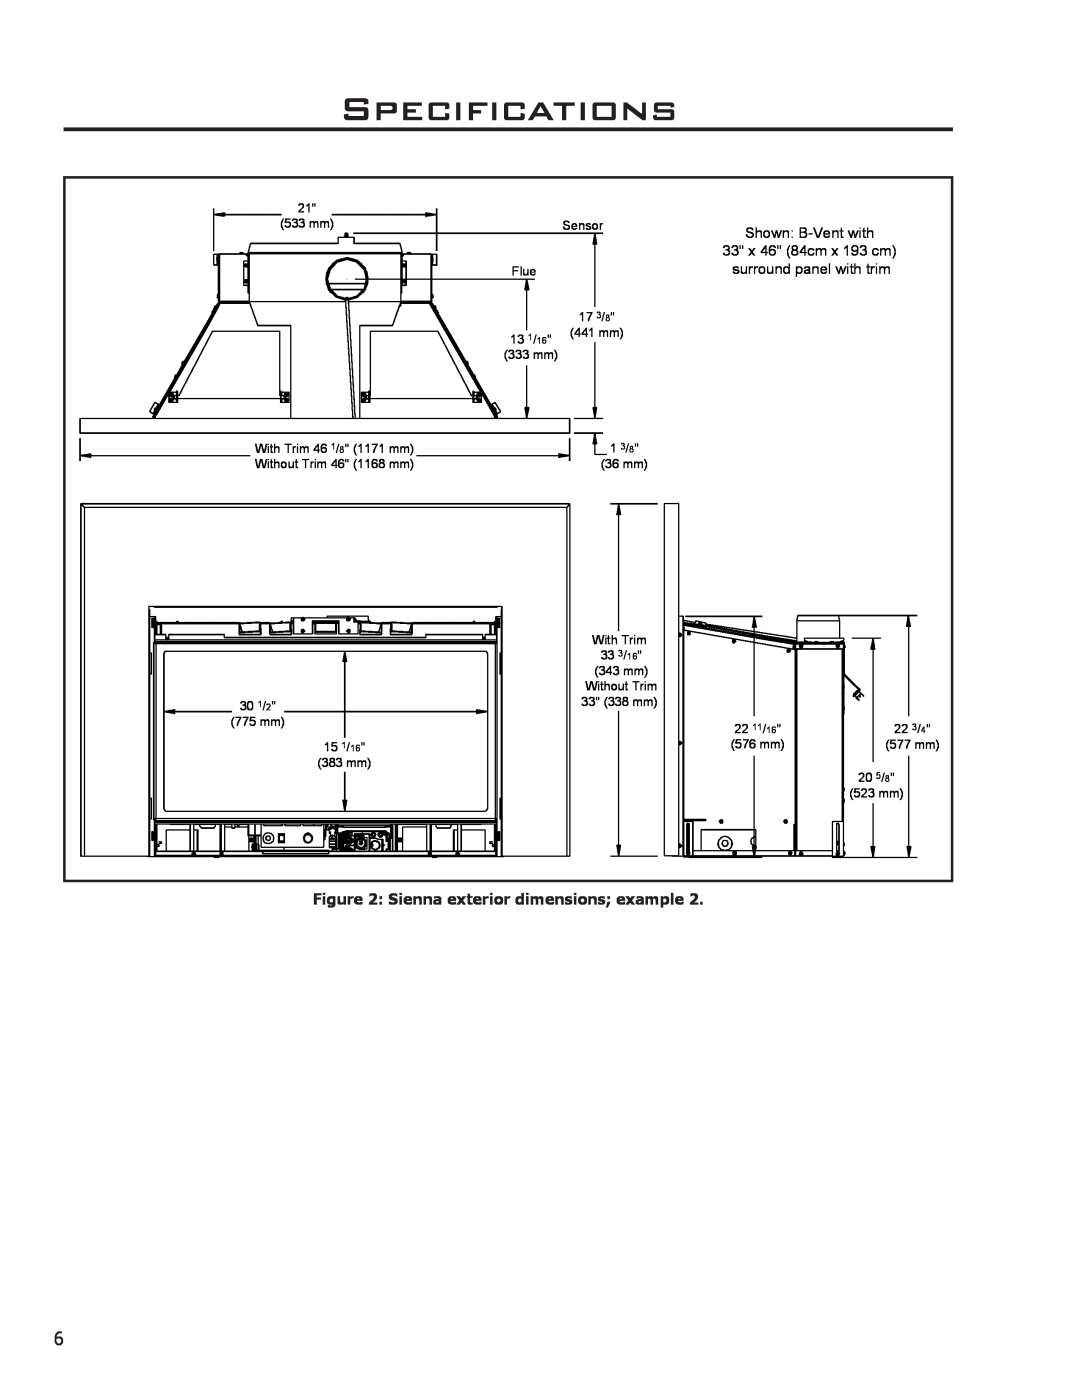 Enviro Indoor Gas Fireplace owner manual Specifications, Sienna exterior dimensions example, 33 x 46 84cm x 193 cm 